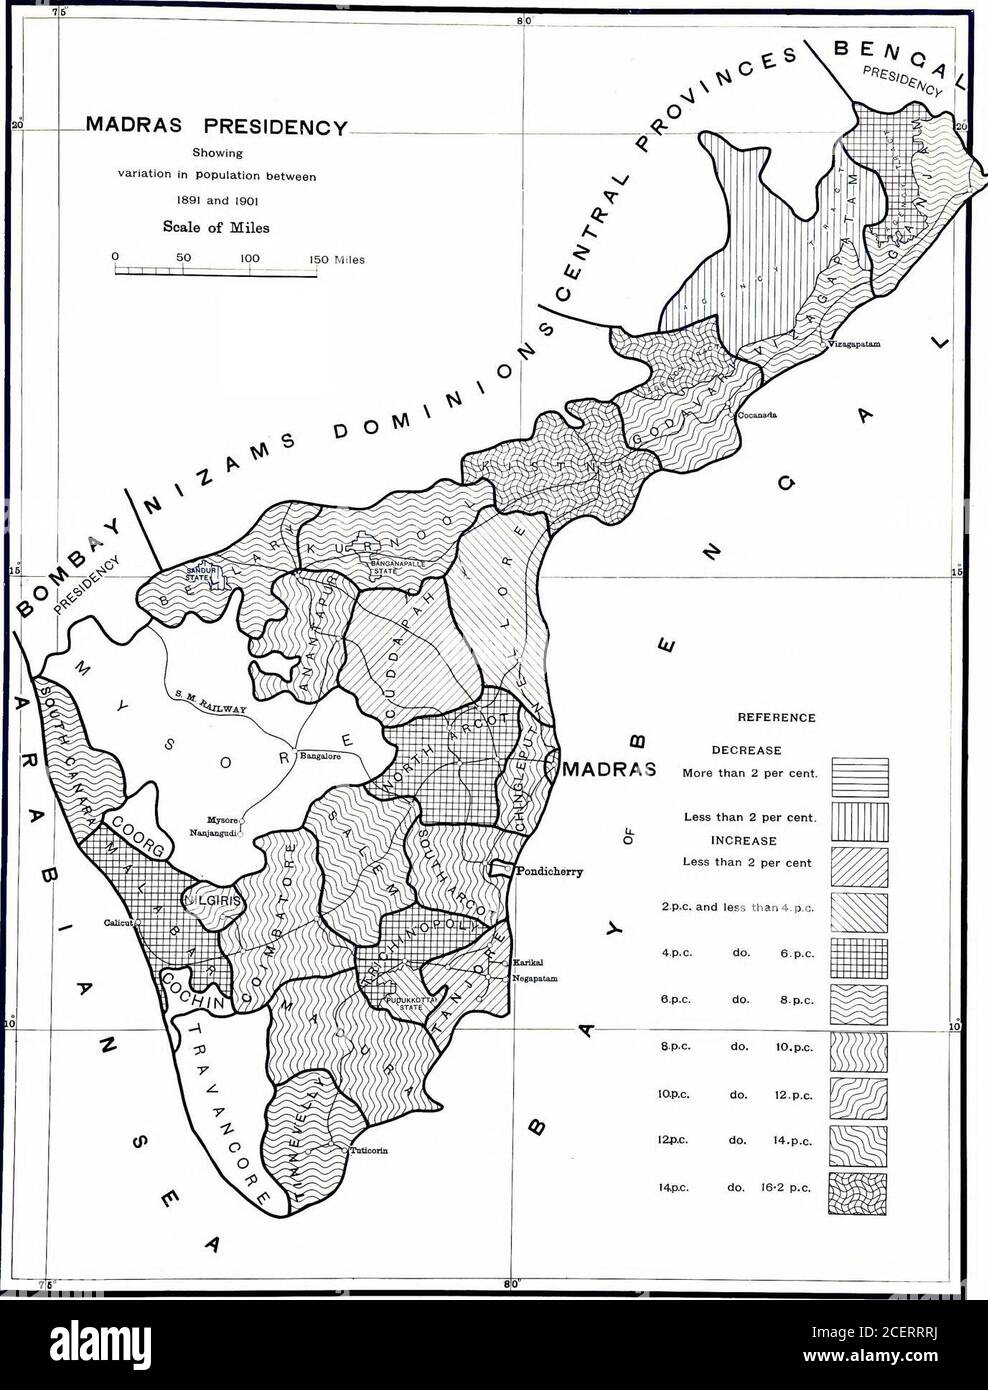 . Census of India, 1901. eg: No. 6507opies 1200 Photo-Print Survey Office, Madras.1901. Reg: No. 6535Copies 1200 Photo-Print., Survey Office, IVIadras.1901 MADRAS PRESIDENCY Showingthe number of Musalmans in every 1000of the total population of each district. Scale of Miles100 50 150 Miles V^ ^ S B E A/ c ^ O T A, Stock Photo